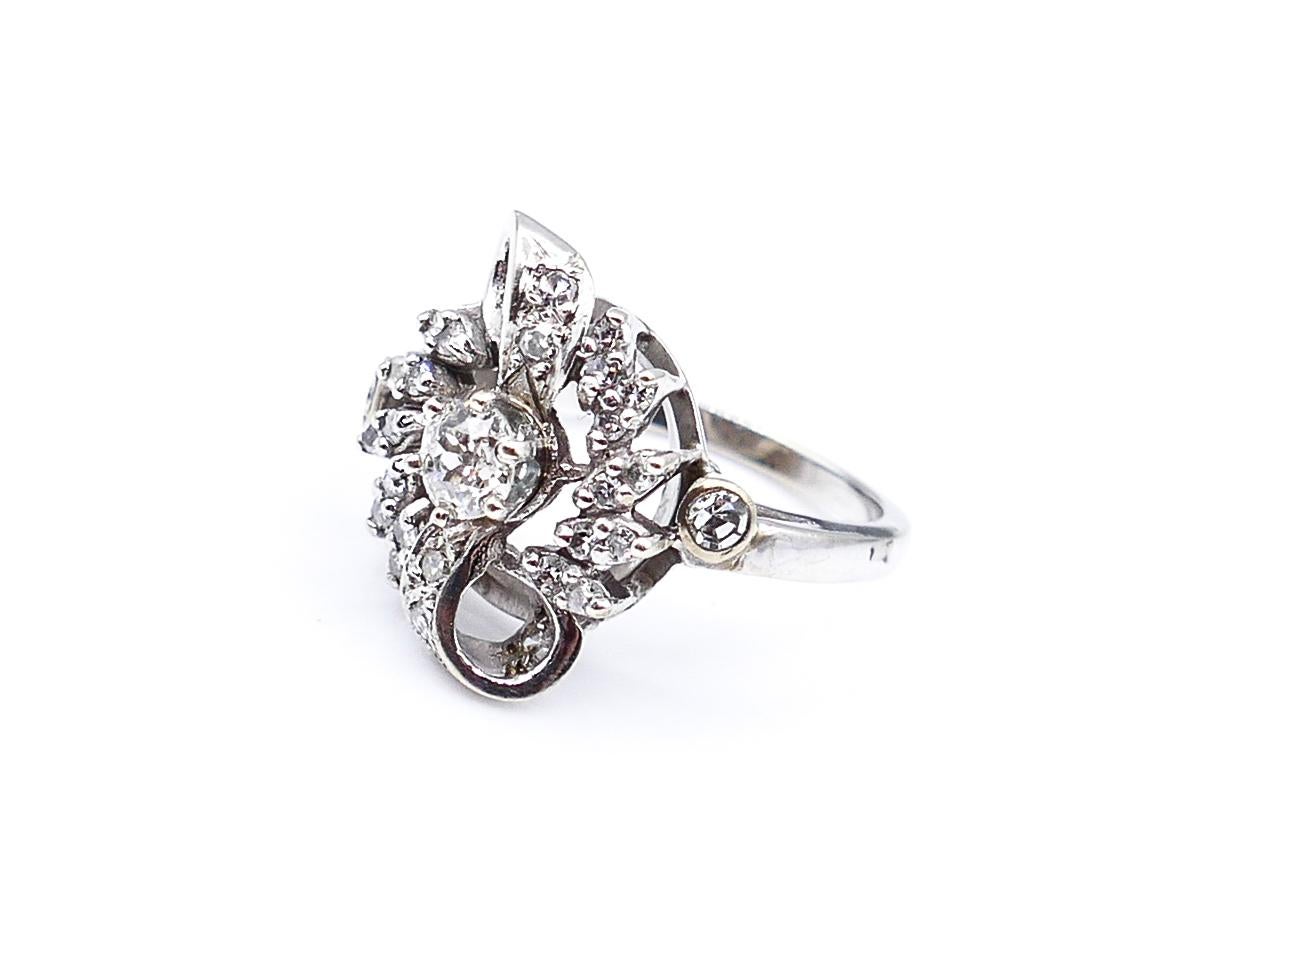 This antique 14 K White Gold ring is made with a prog set center round-cut diamond, weighing 0.75 Carats. The additional 28 Diamonds uniquely coalescing around it, weigh a total of 0.5 carats, and create the feeling that one is looking into an eye